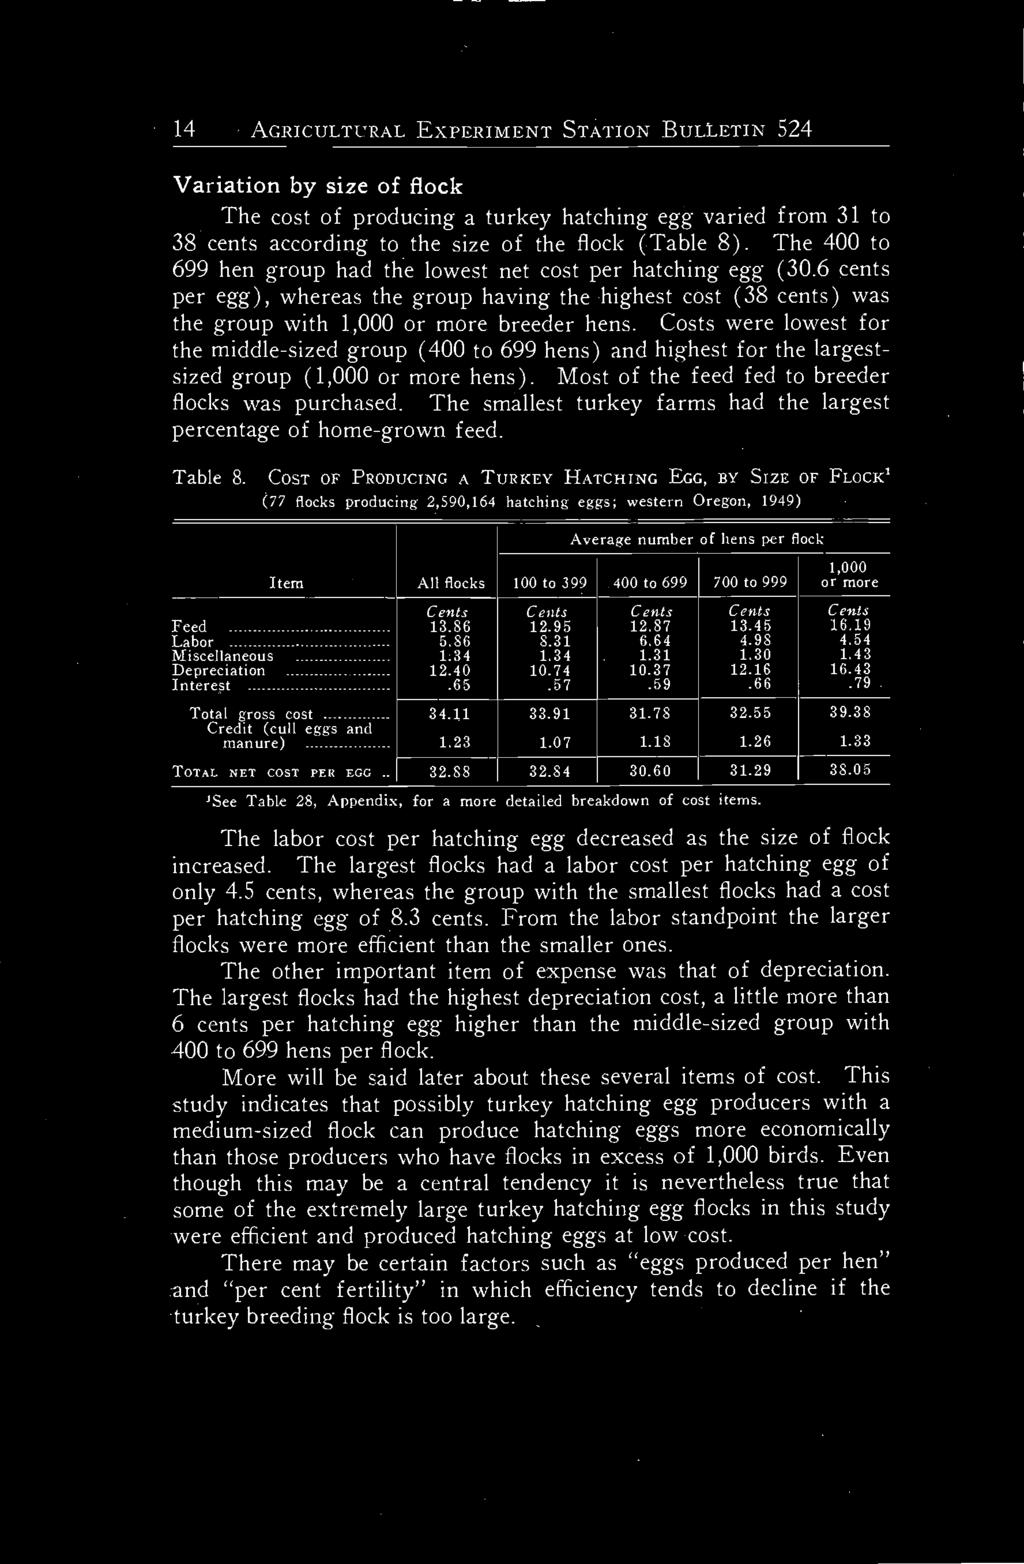 14 AGRICULTURAL EXPERIMENT STATION BULLETIN 524 Variation by size of flock The cost of producing a turkey hatching egg varied from 31 to 38 cents according to the size of the flock (Table 8).